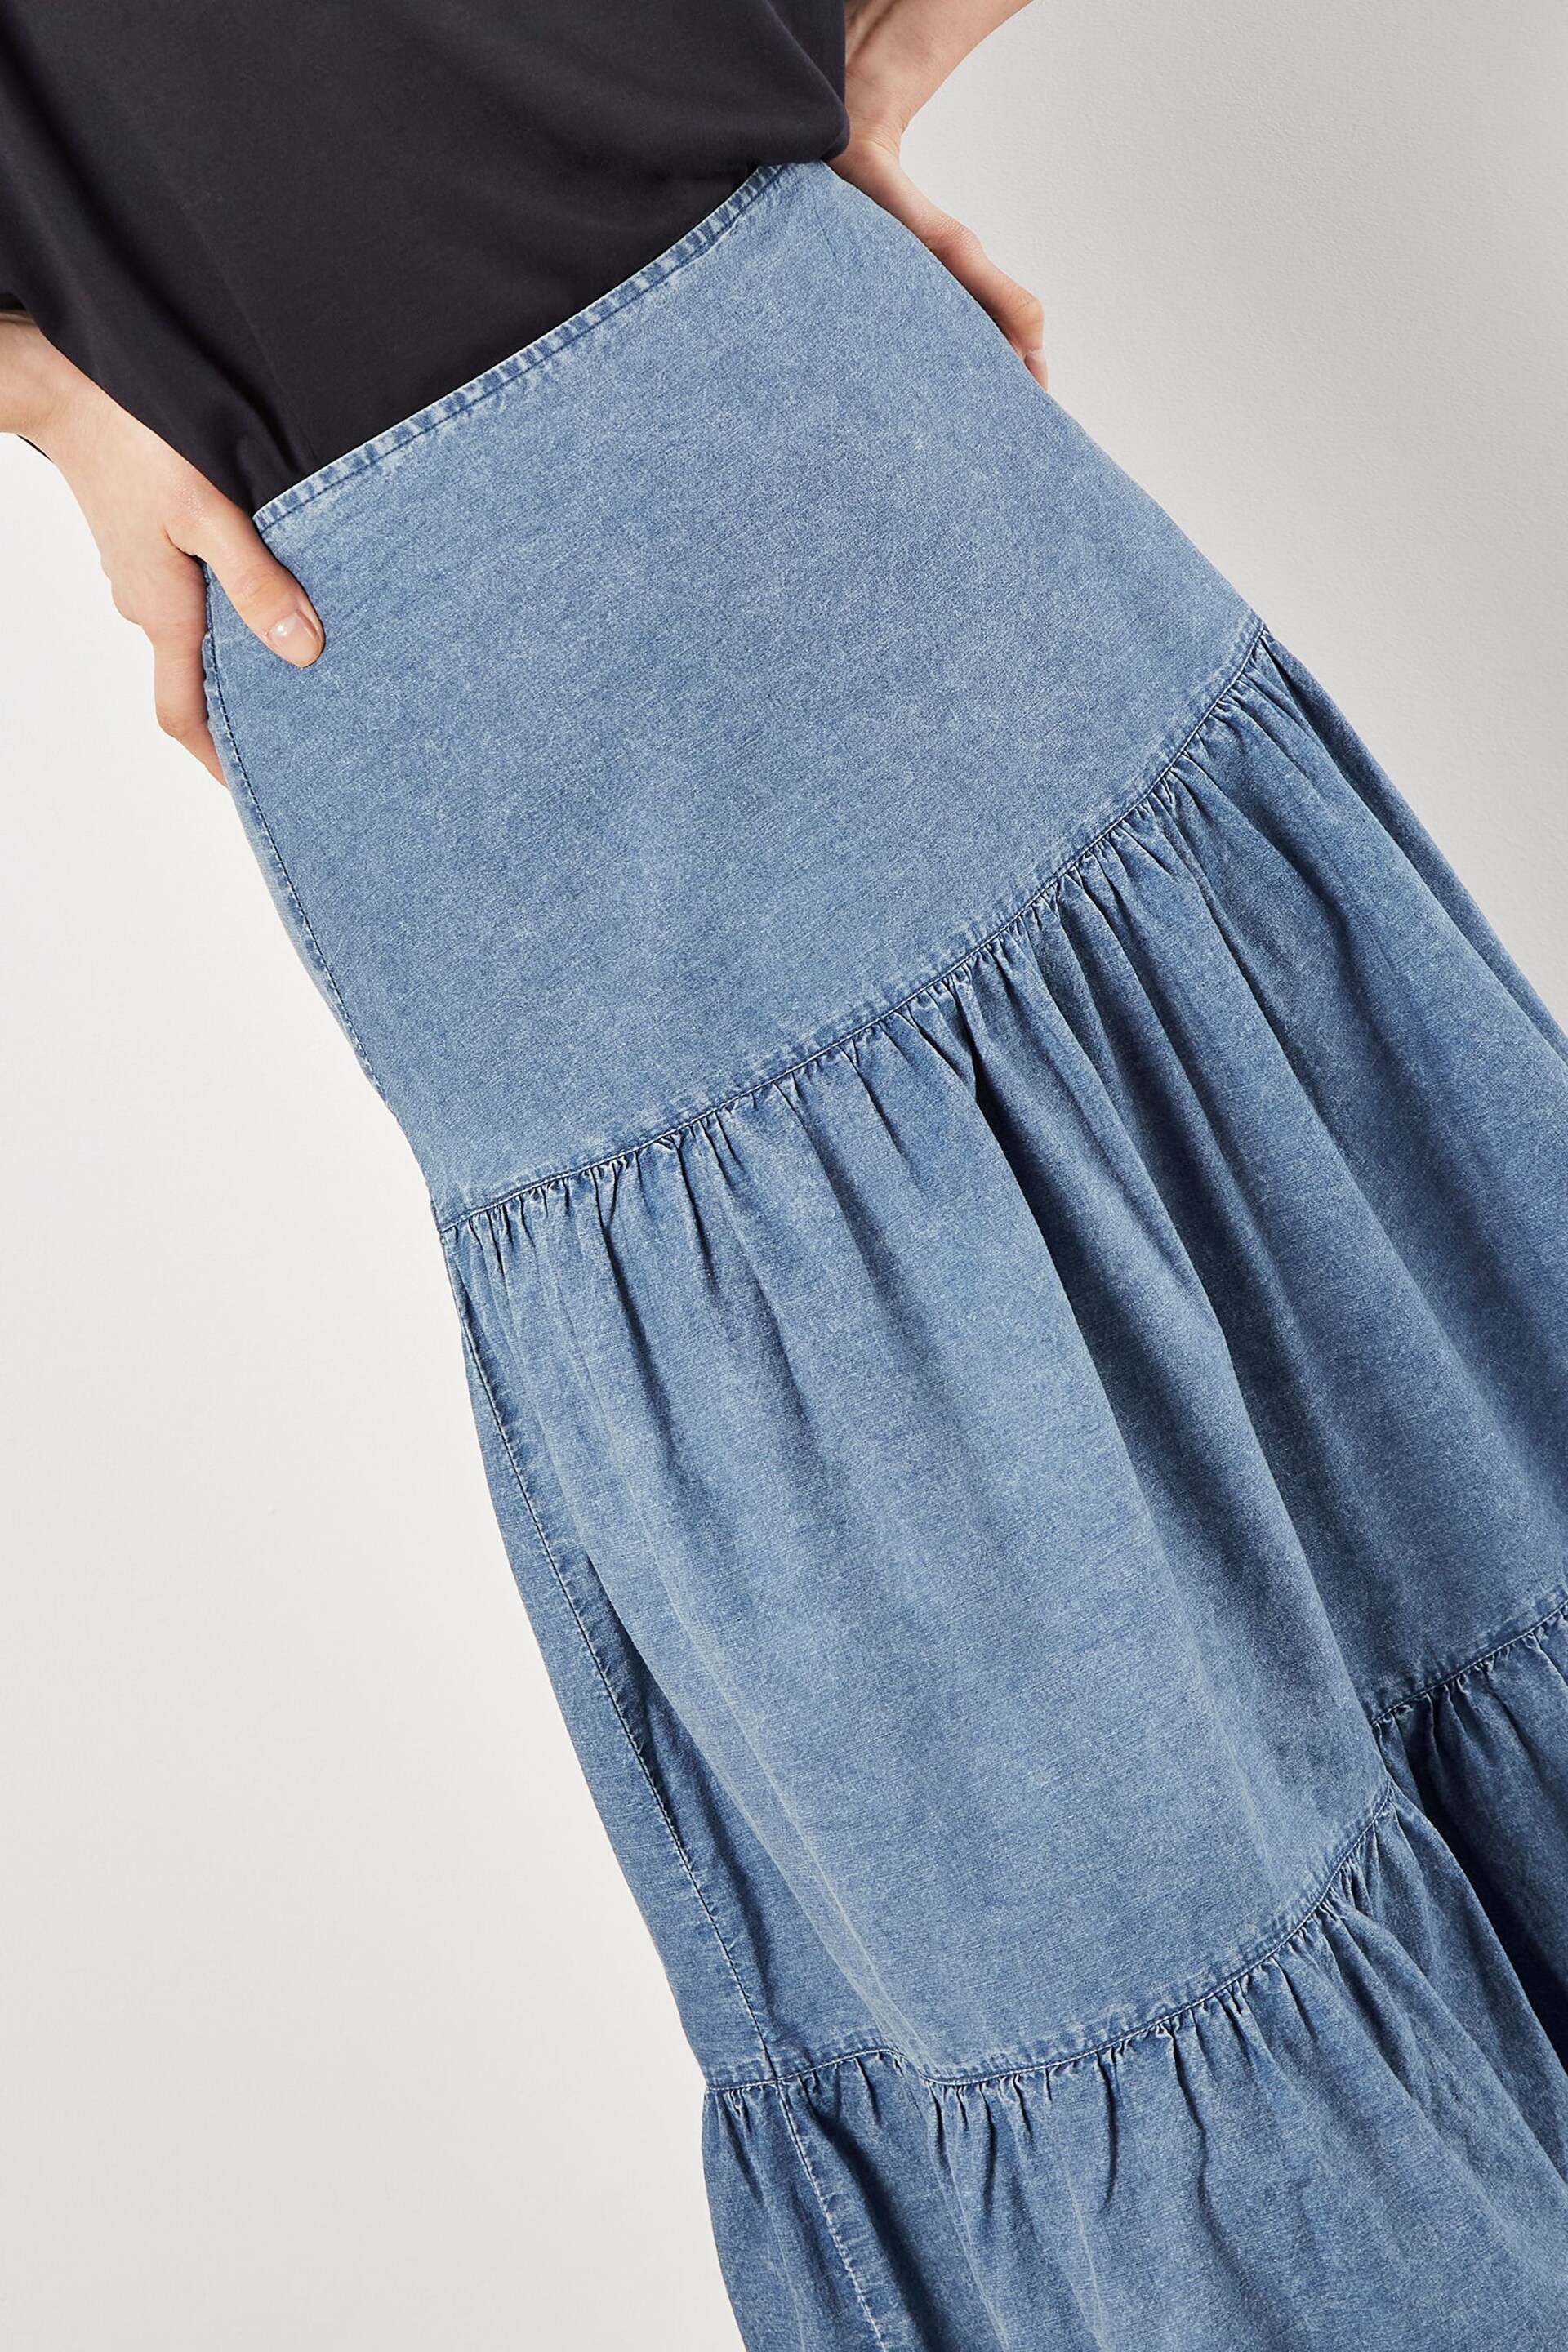 Apricot Blue Tiered Denim Skirt - Image 5 of 5